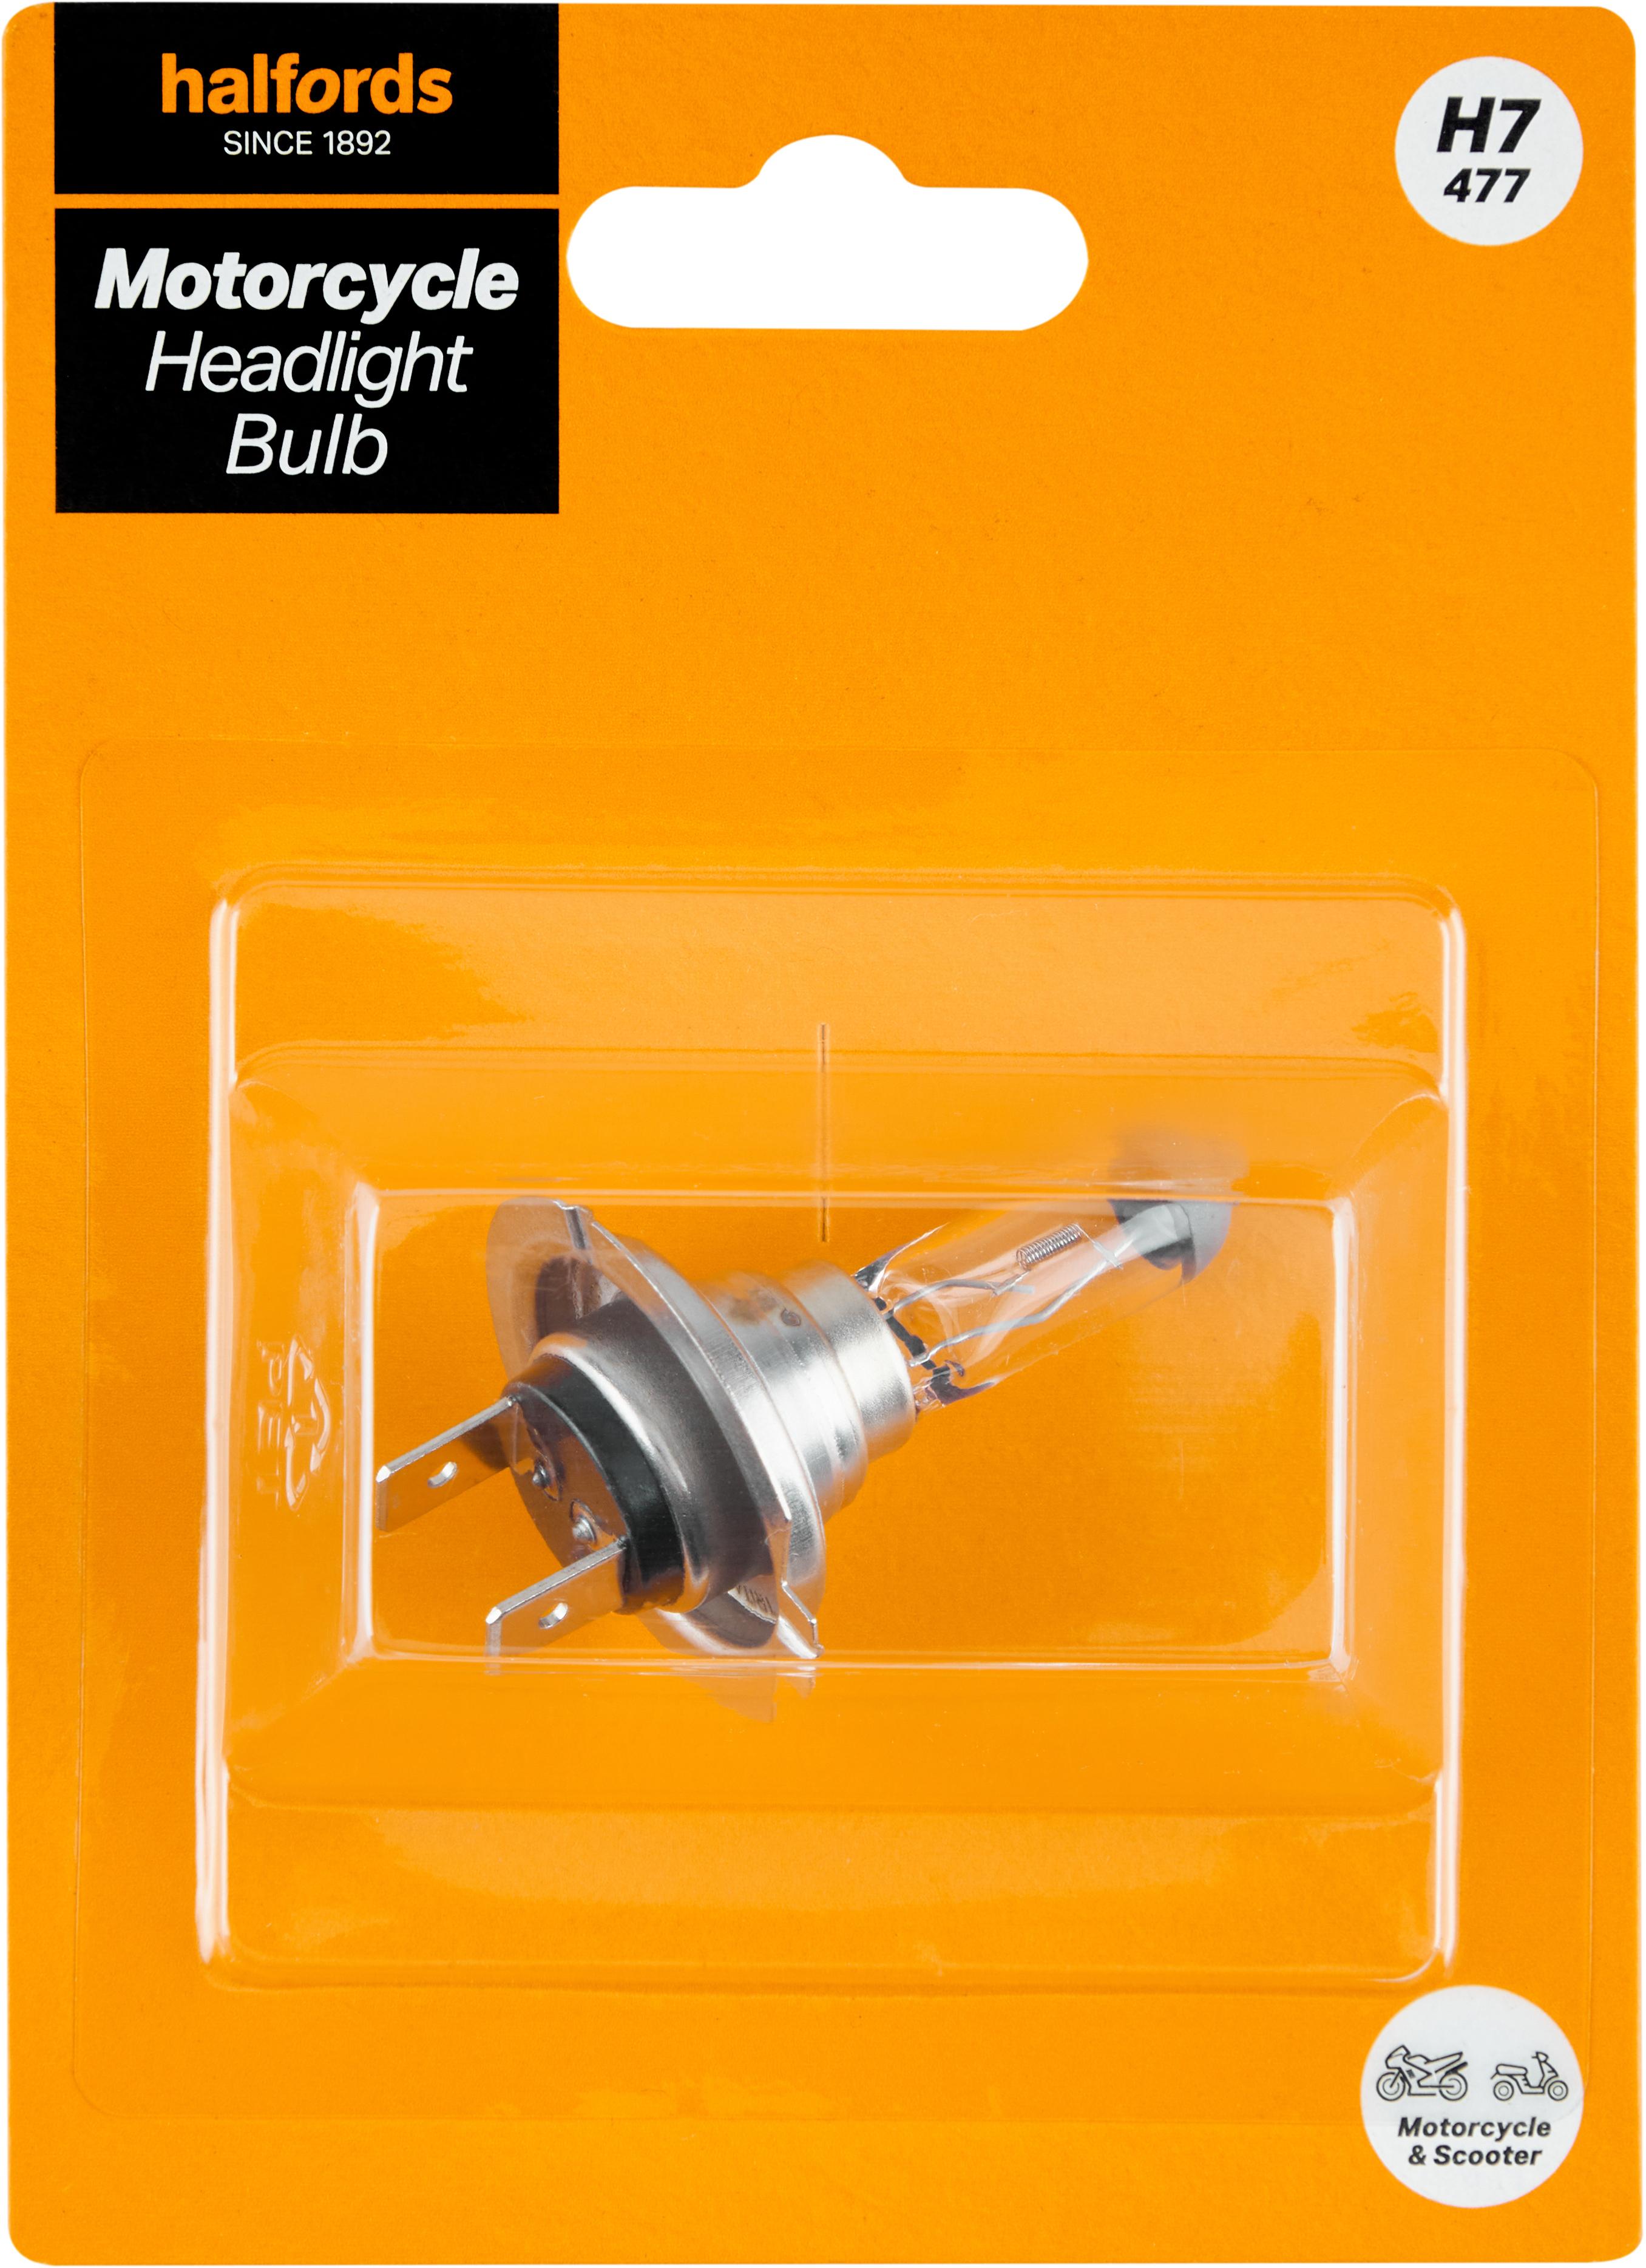 Halfords Core Motorcycle Bulb H7 477